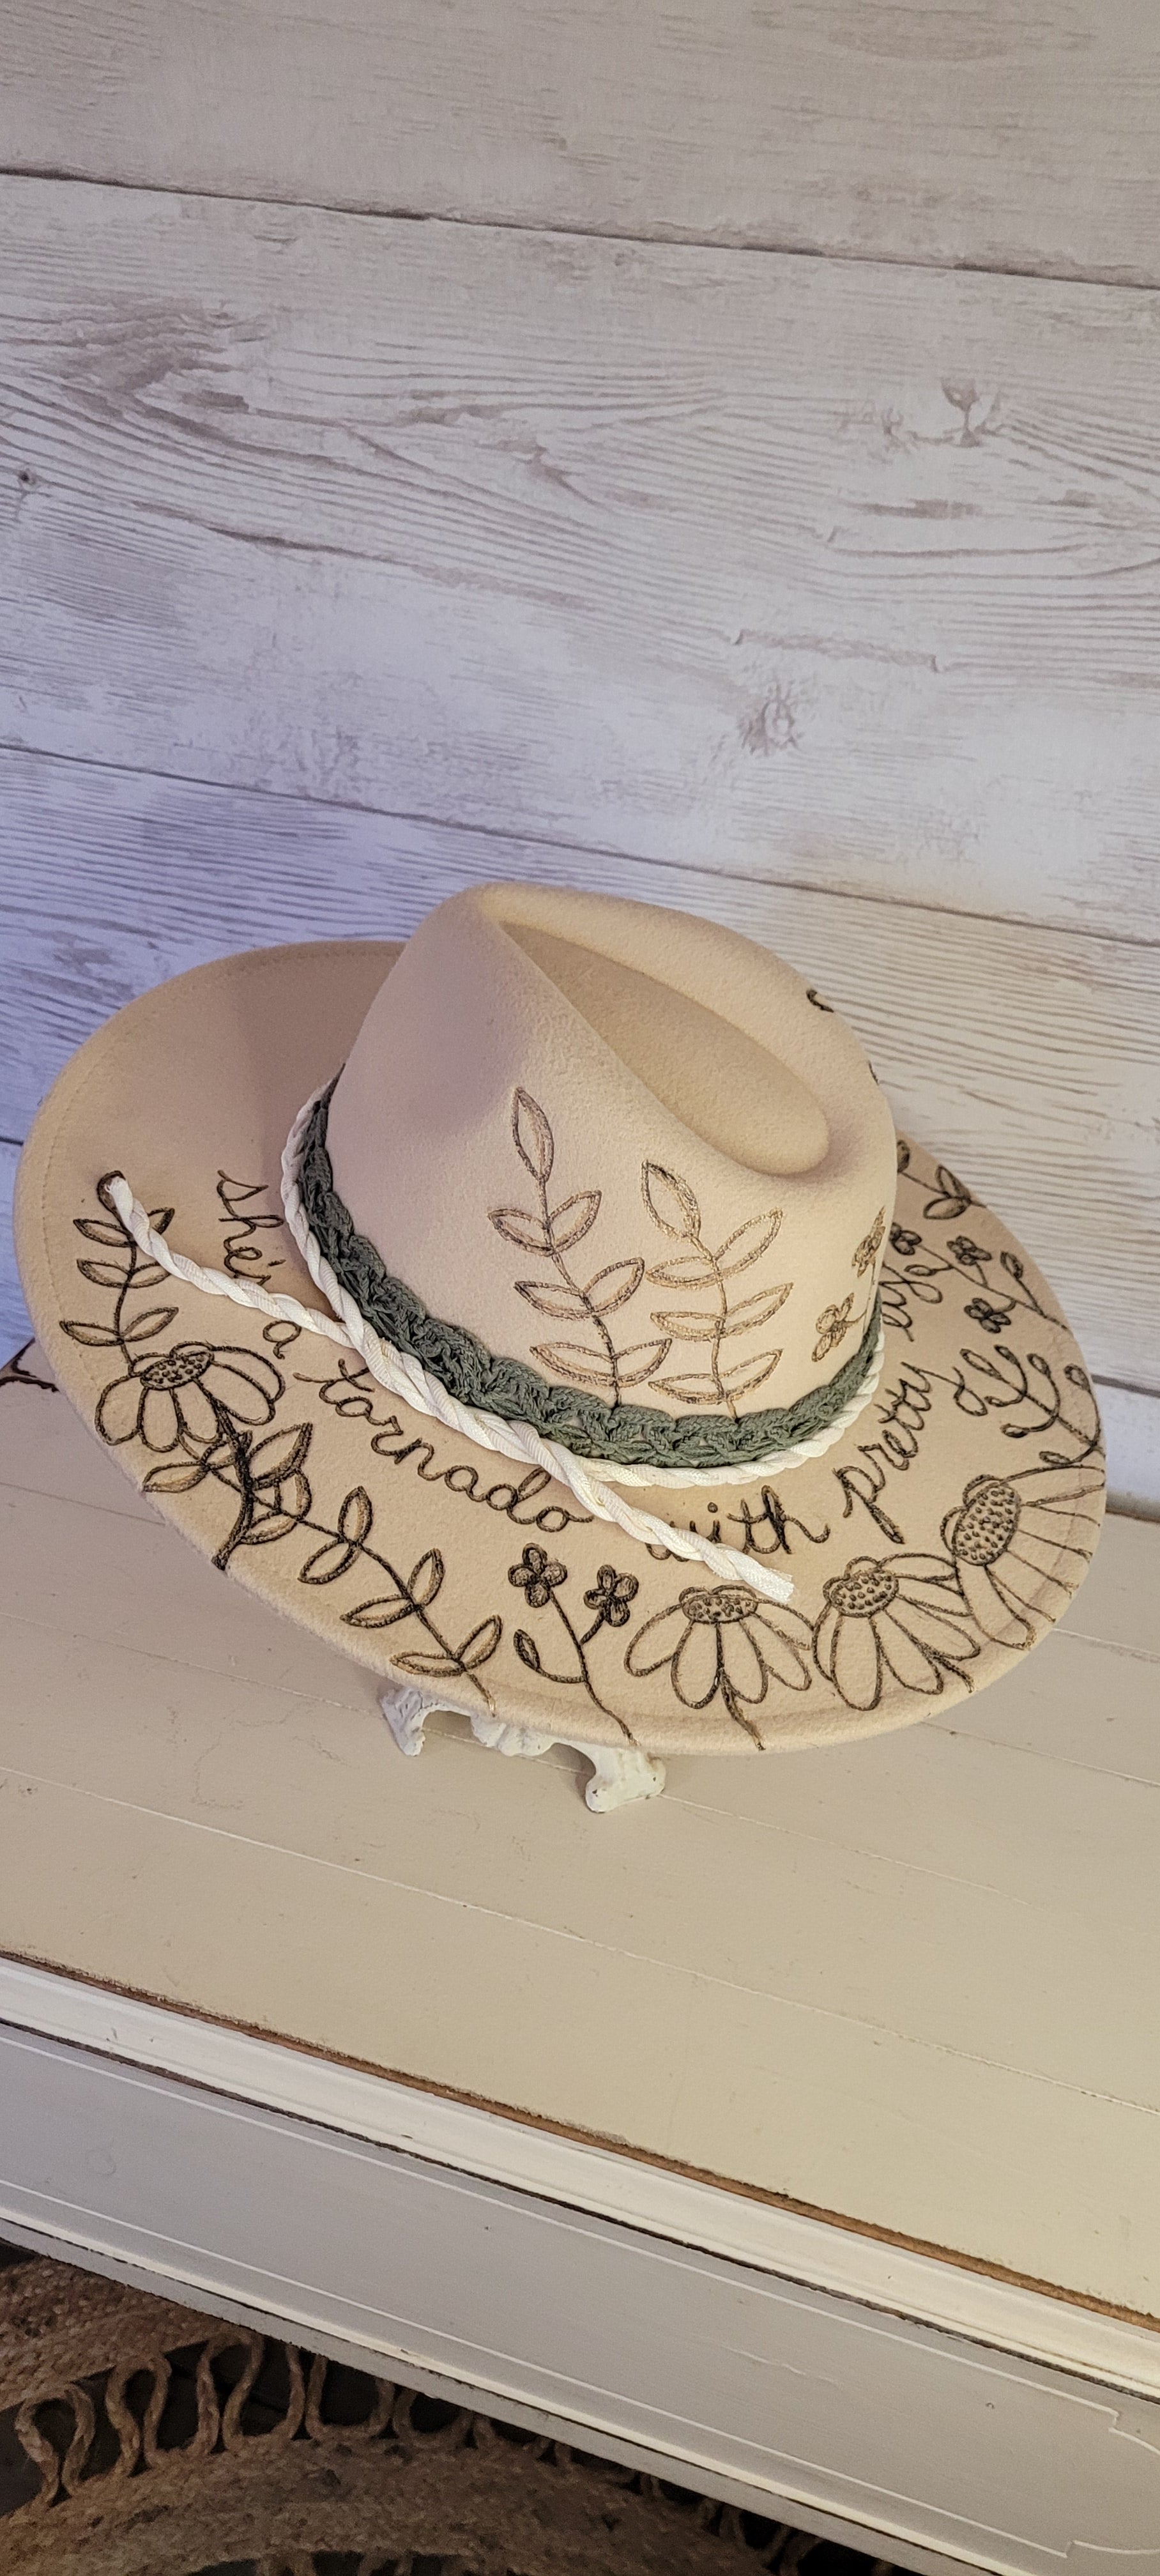 Custom engraved by Kayla Features whimsical flowers Ivory brim hat fedora style Felt hat Flat brim 65% polyester and 35% cotton Ribbon drawstring for hat size adjustment Head Circumference: 25" H:5.25" L:16" W:14.5"